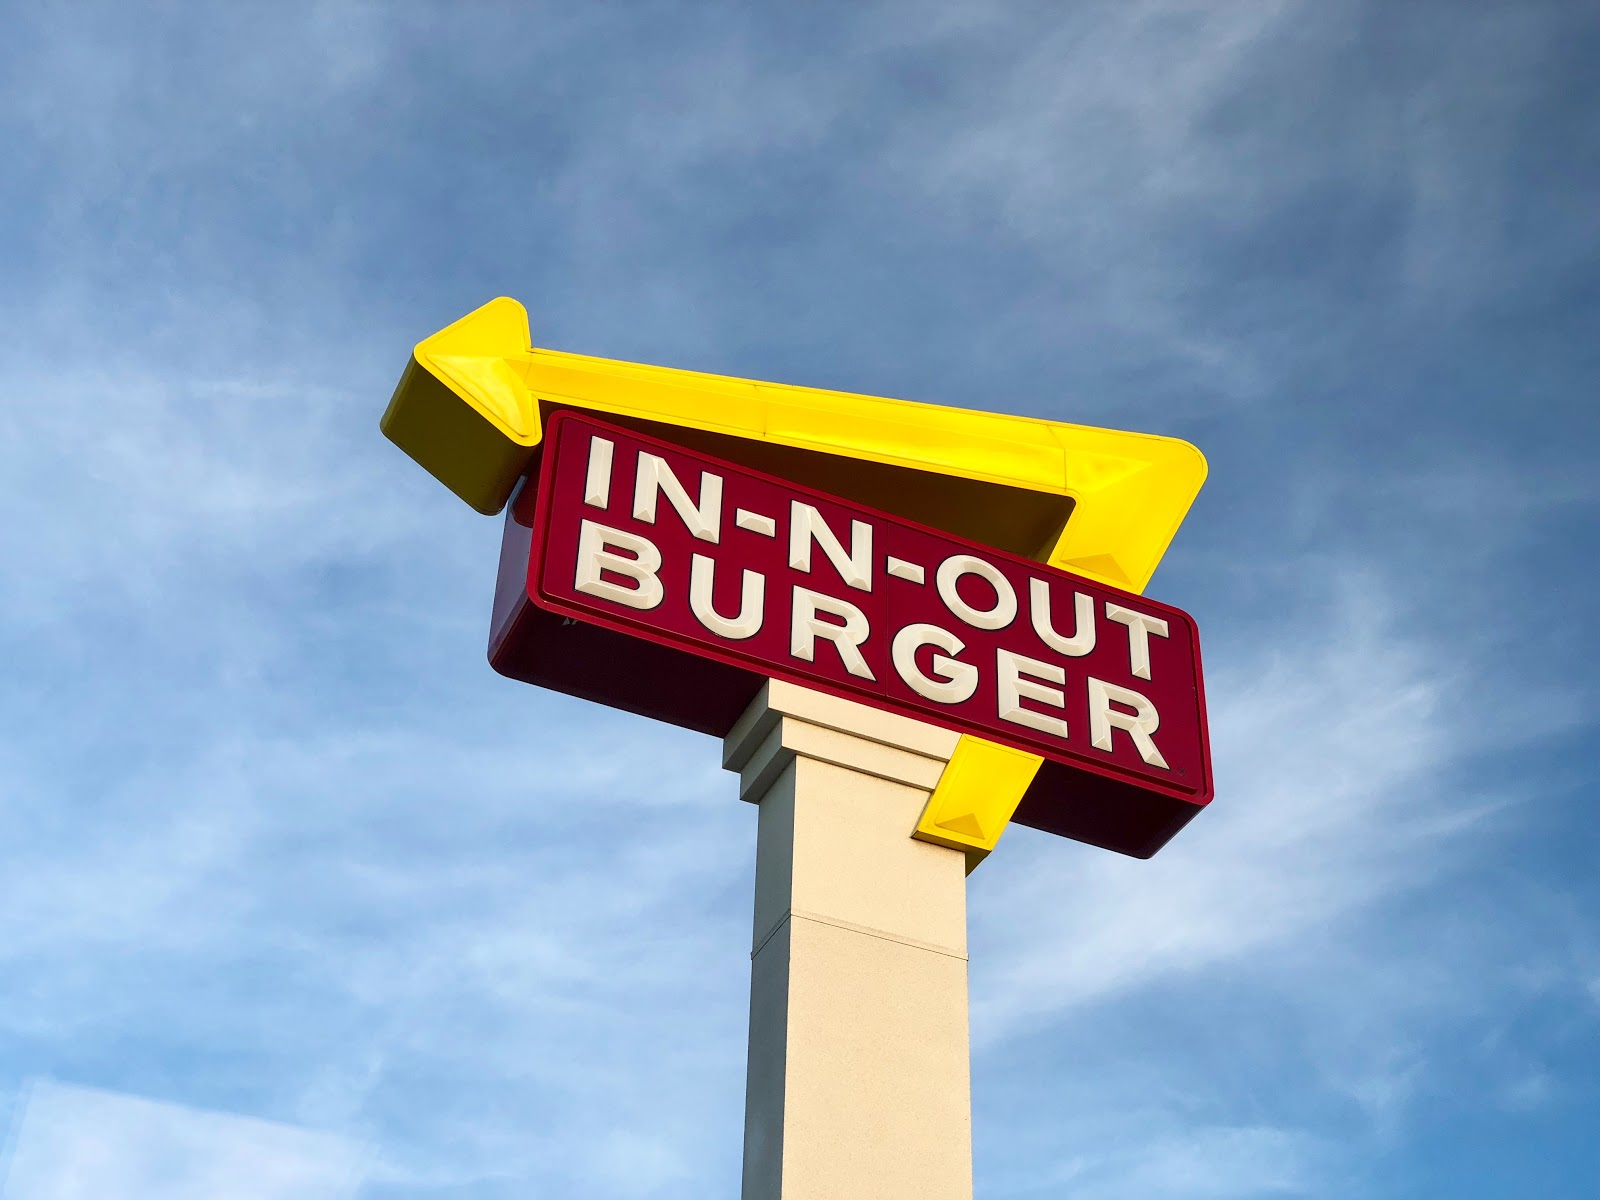 IN-N-OUT Burger sign 